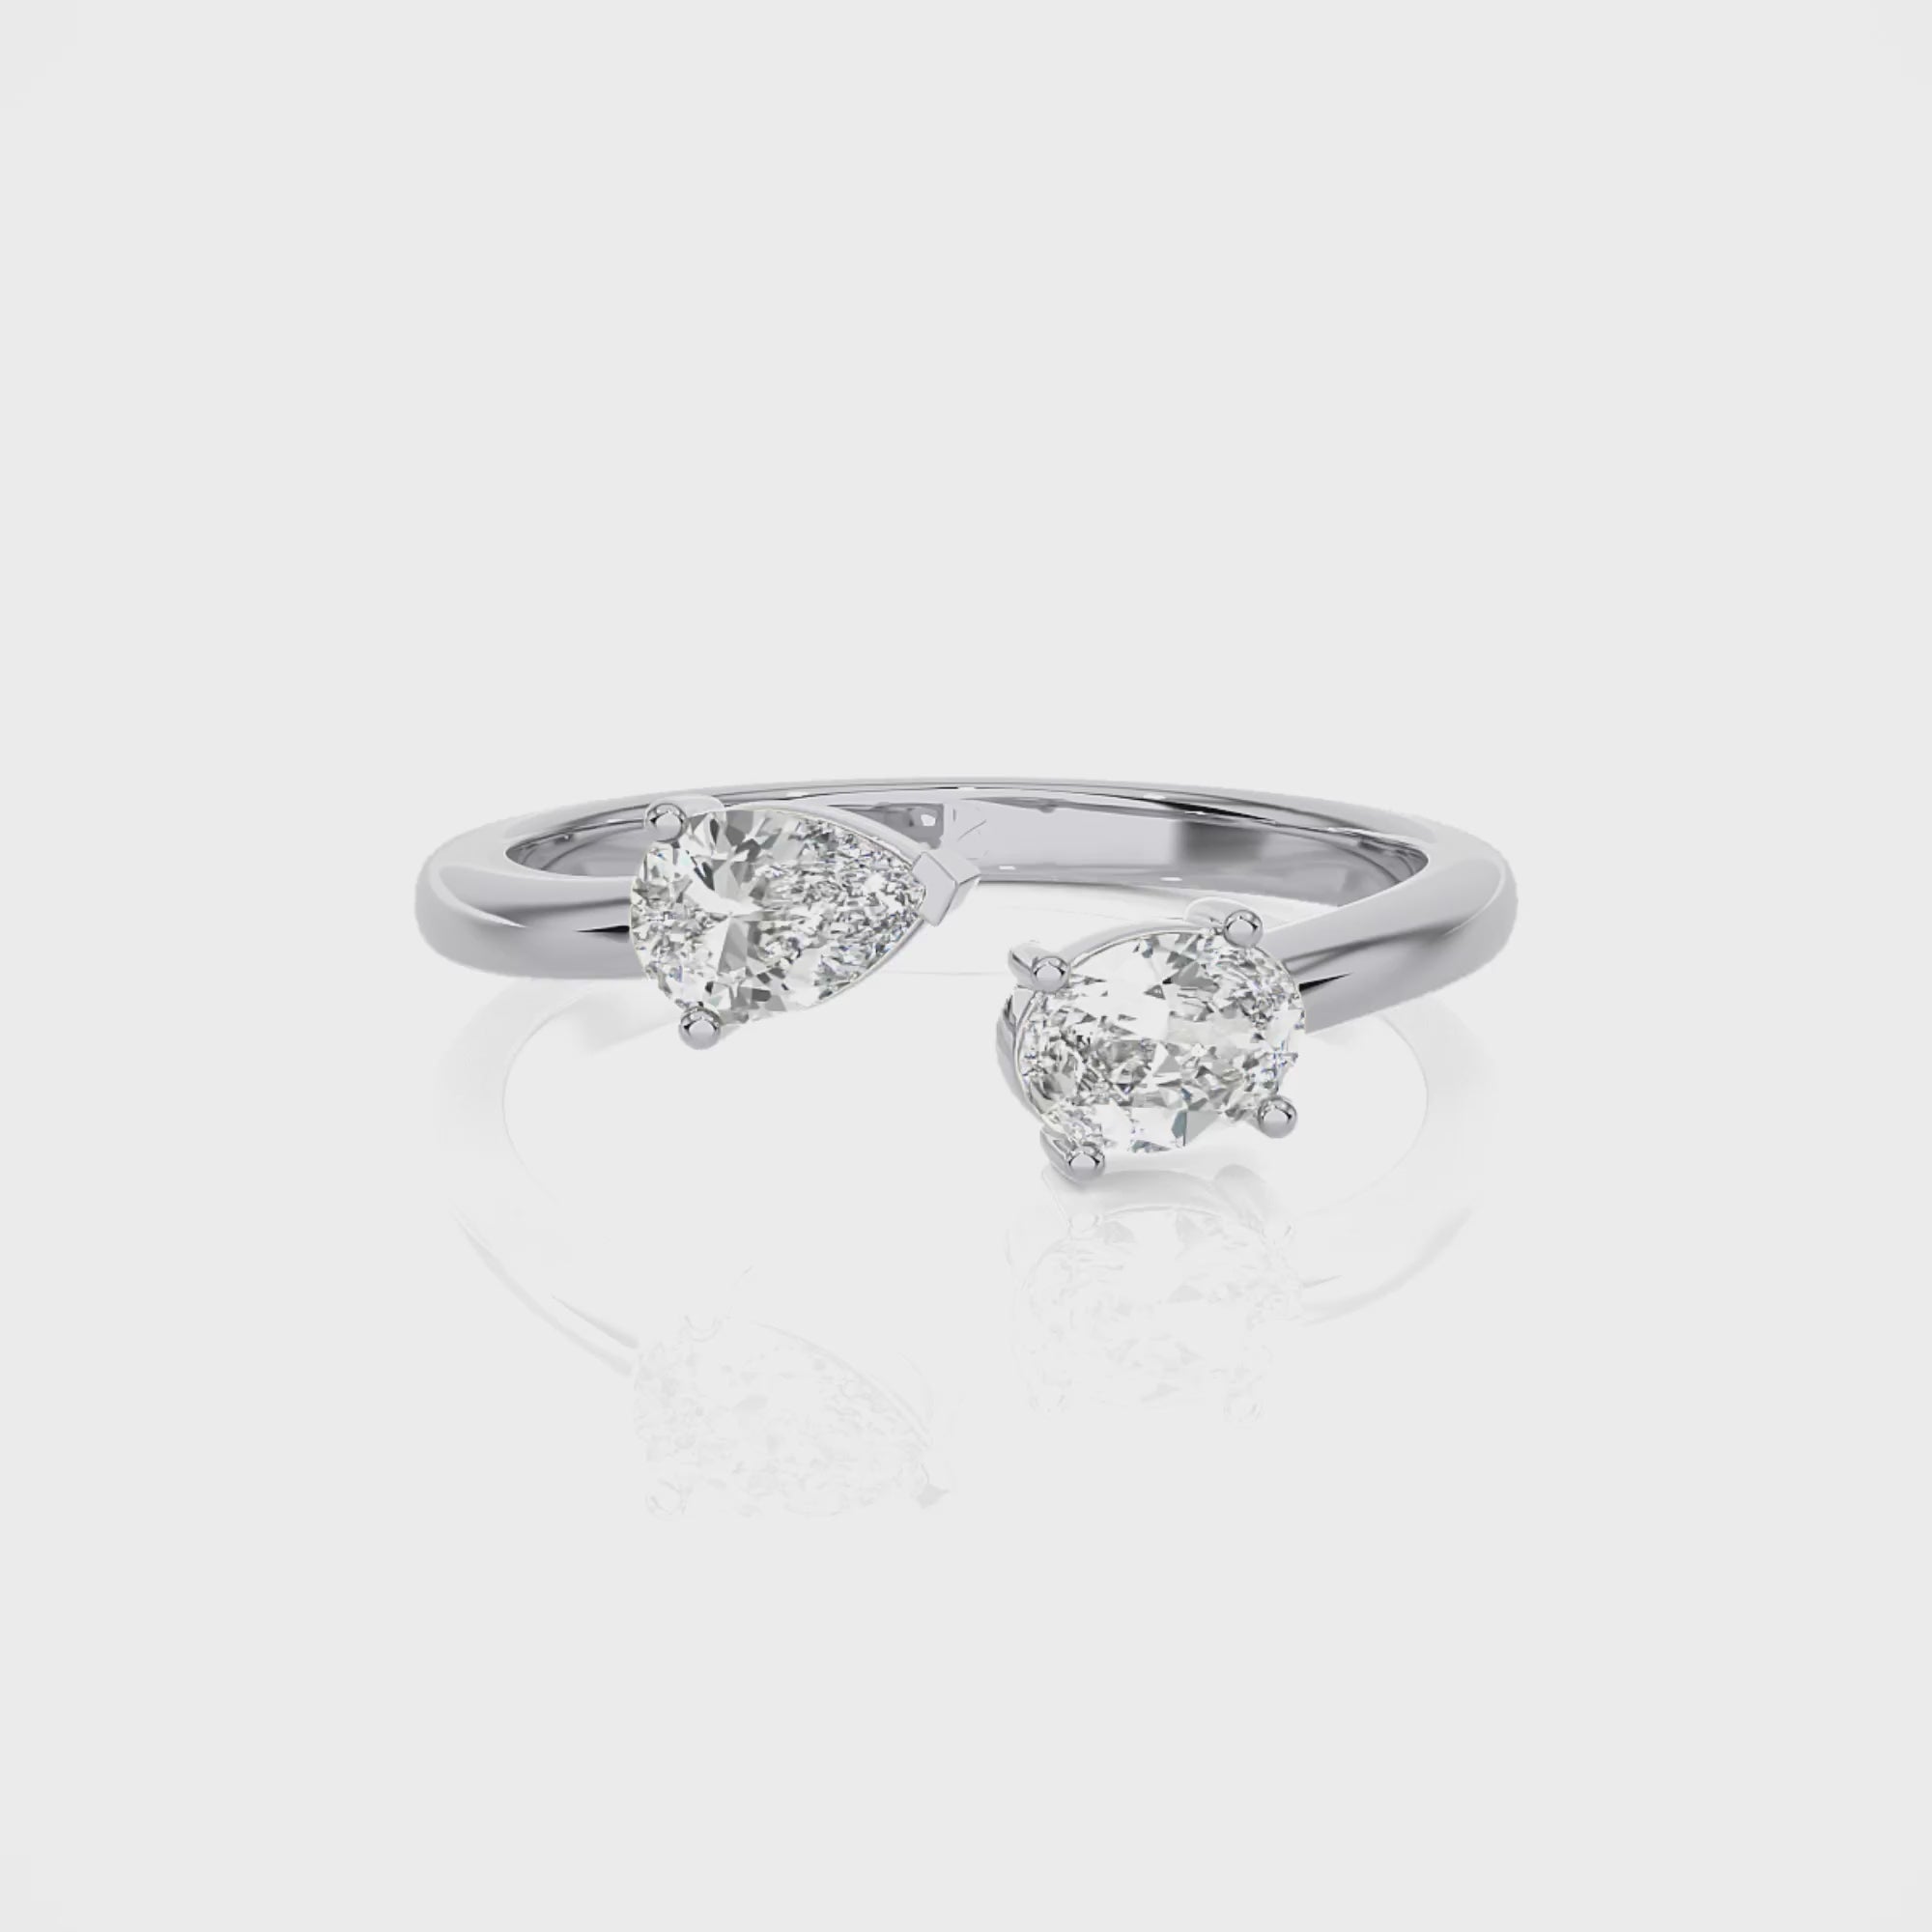 Twin Radiance Solitaire Lab Grown Diamond Ring in 14KT White Gold 